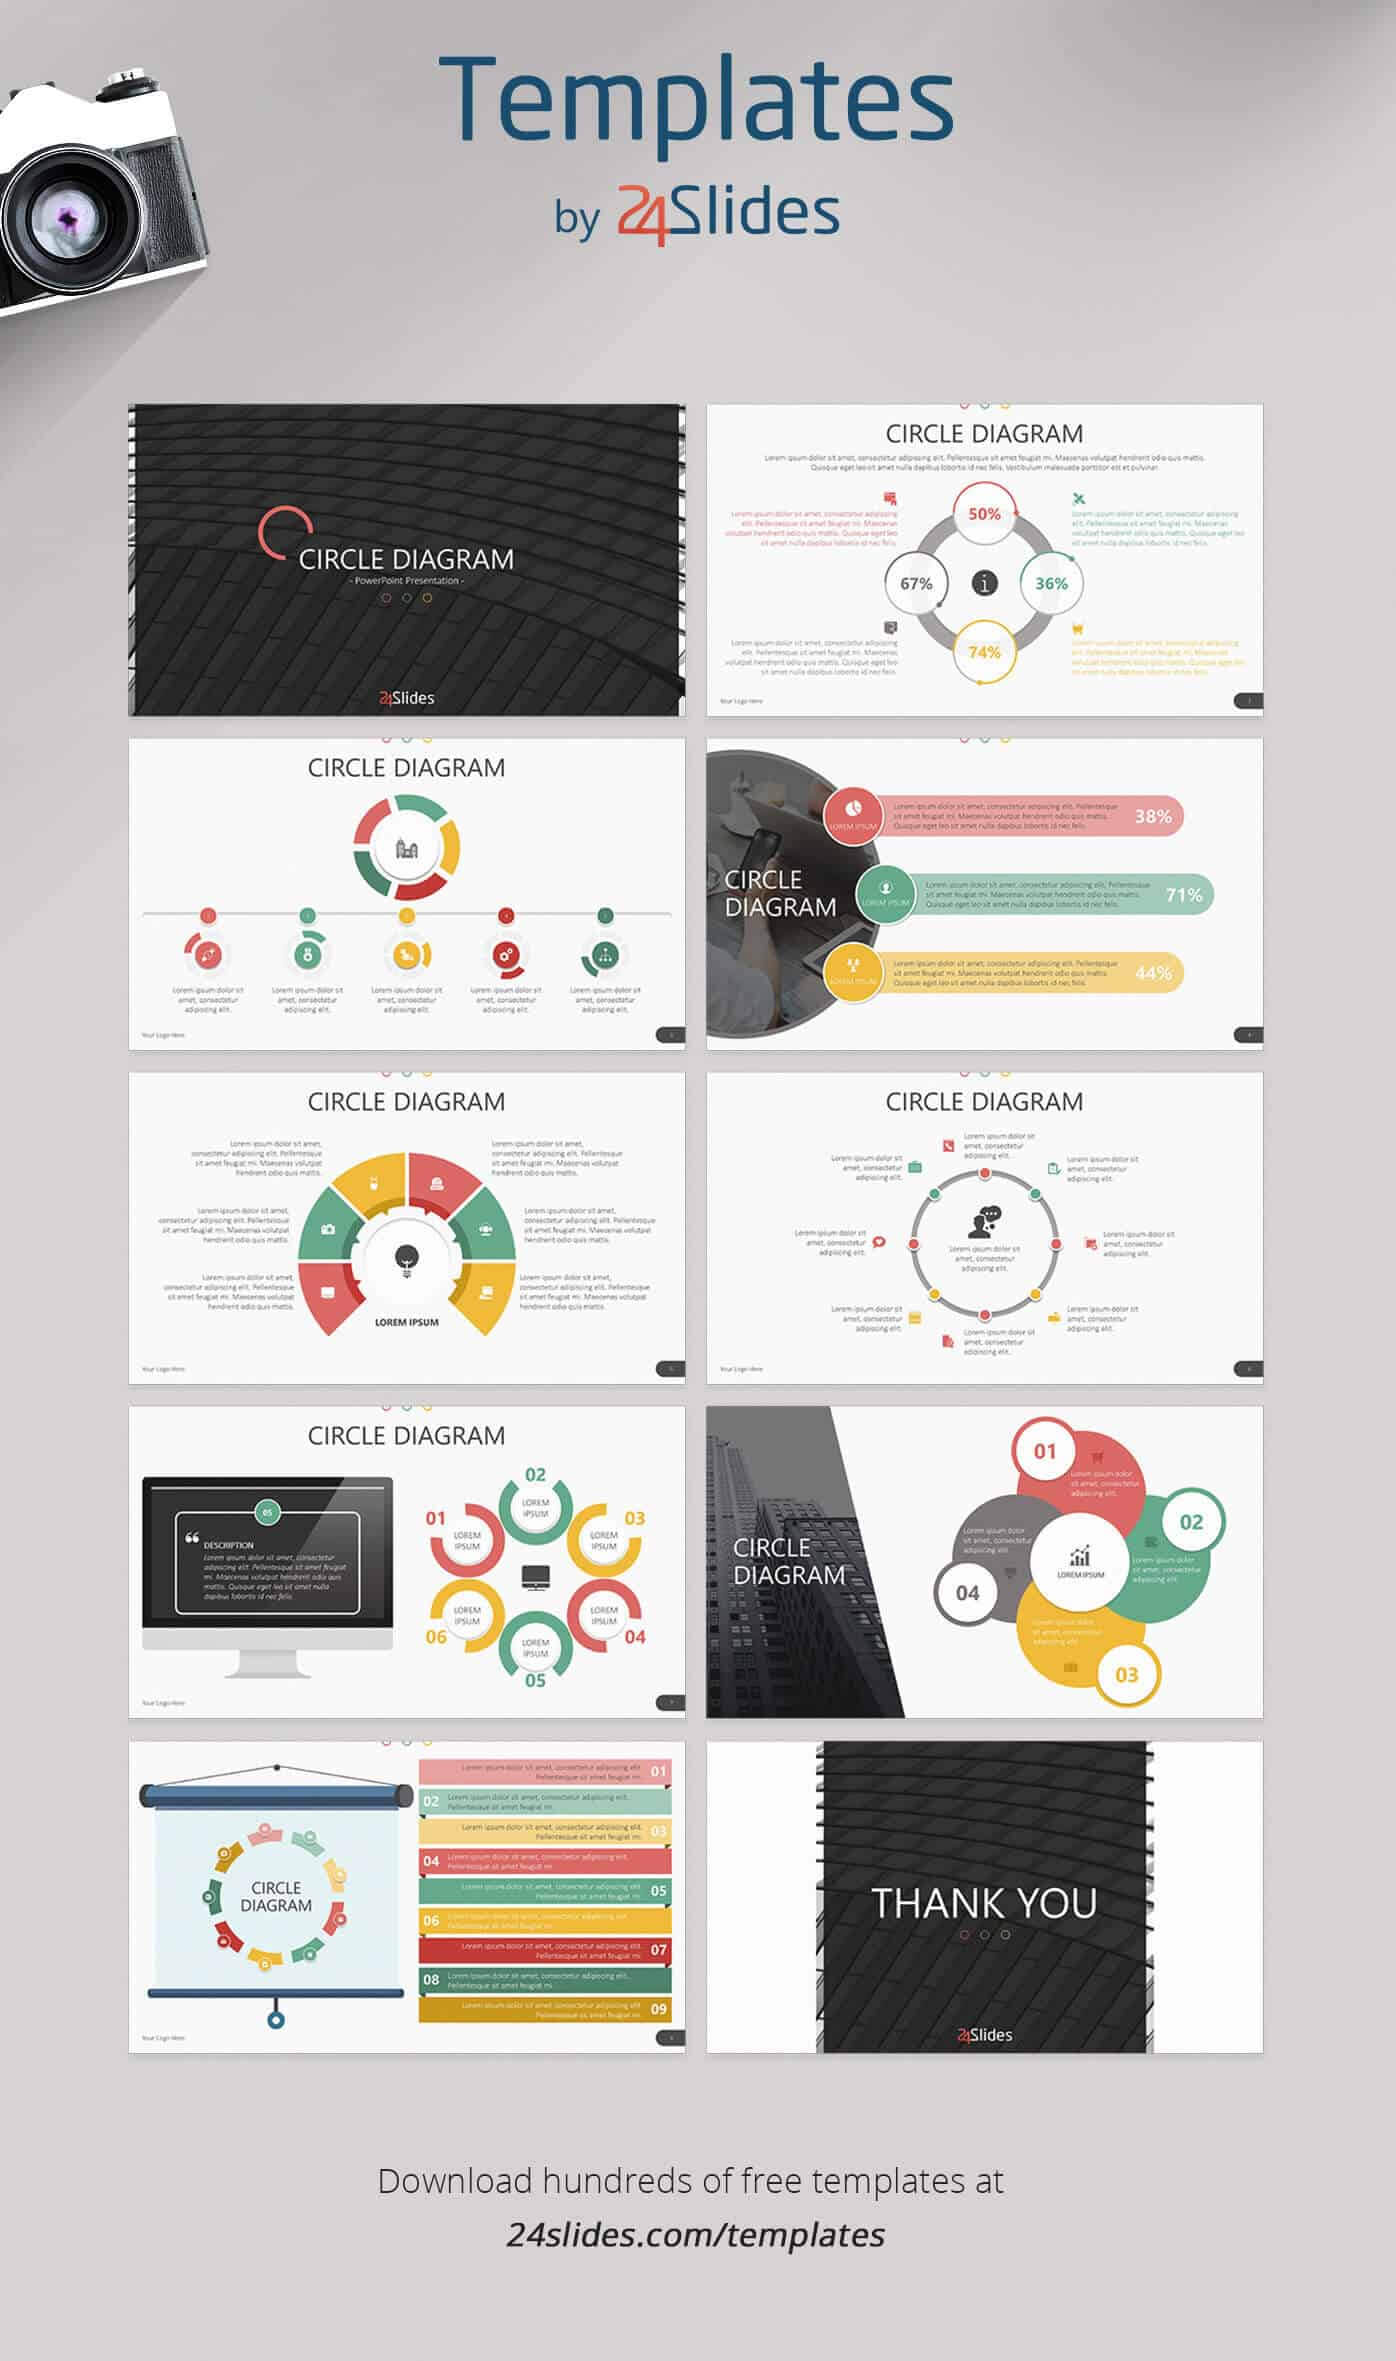 15 Fun And Colorful Free Powerpoint Templates | Present Better In Powerpoint Photo Slideshow Template